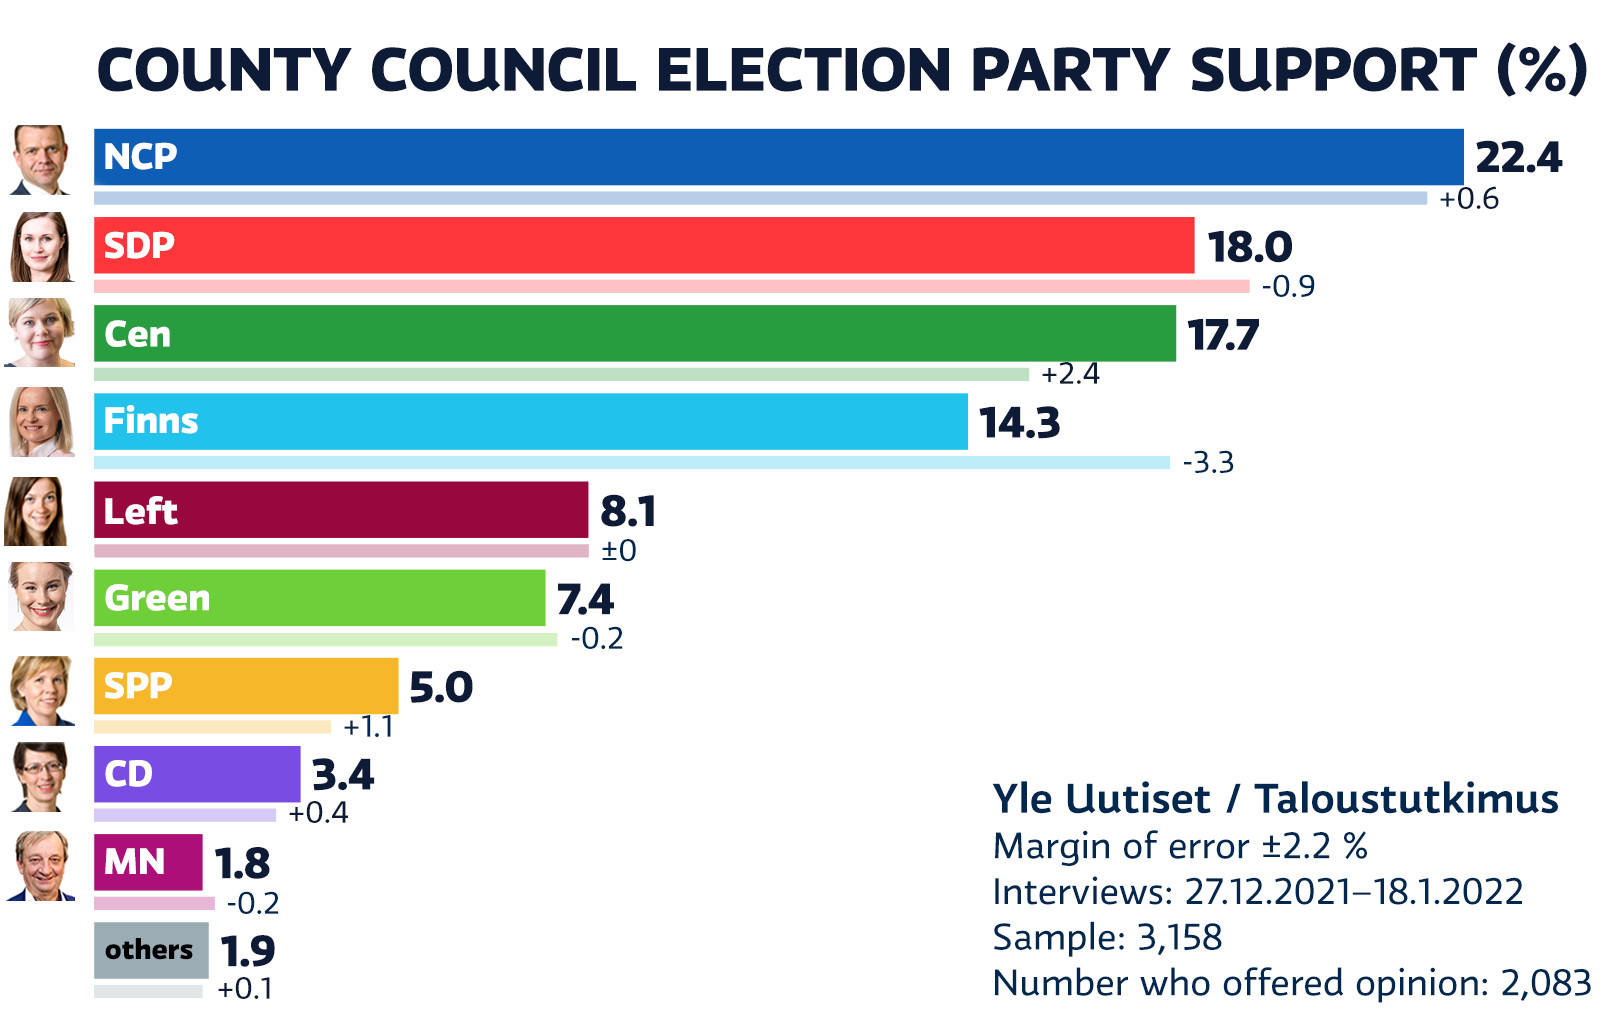 Yle’s provincial election: NCP strengthens its leadership, Center challenges SDP second